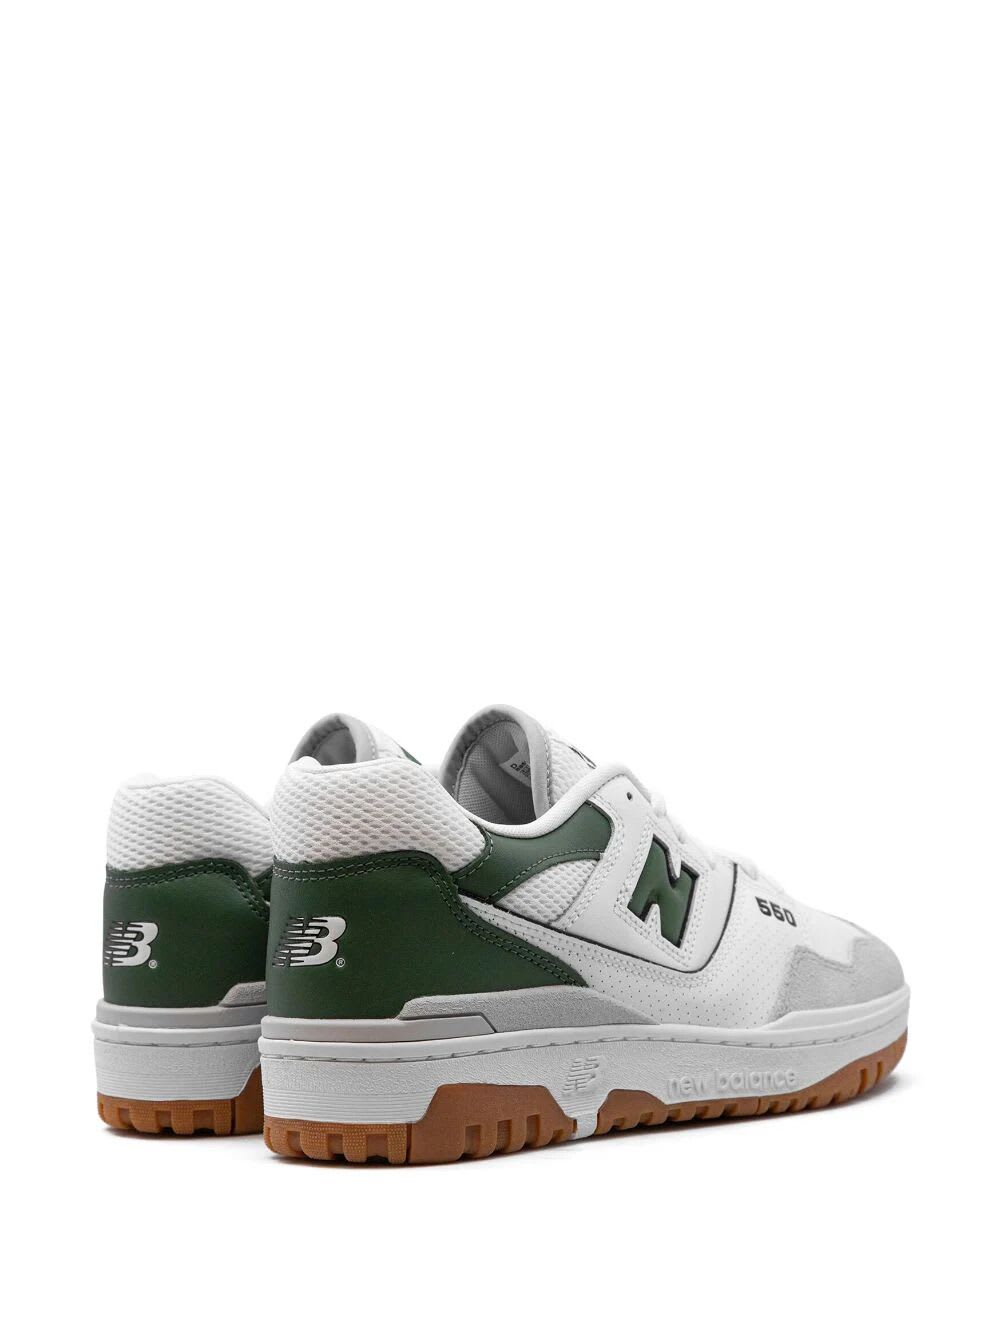 Shop New Balance 550 Sneakers In Multi